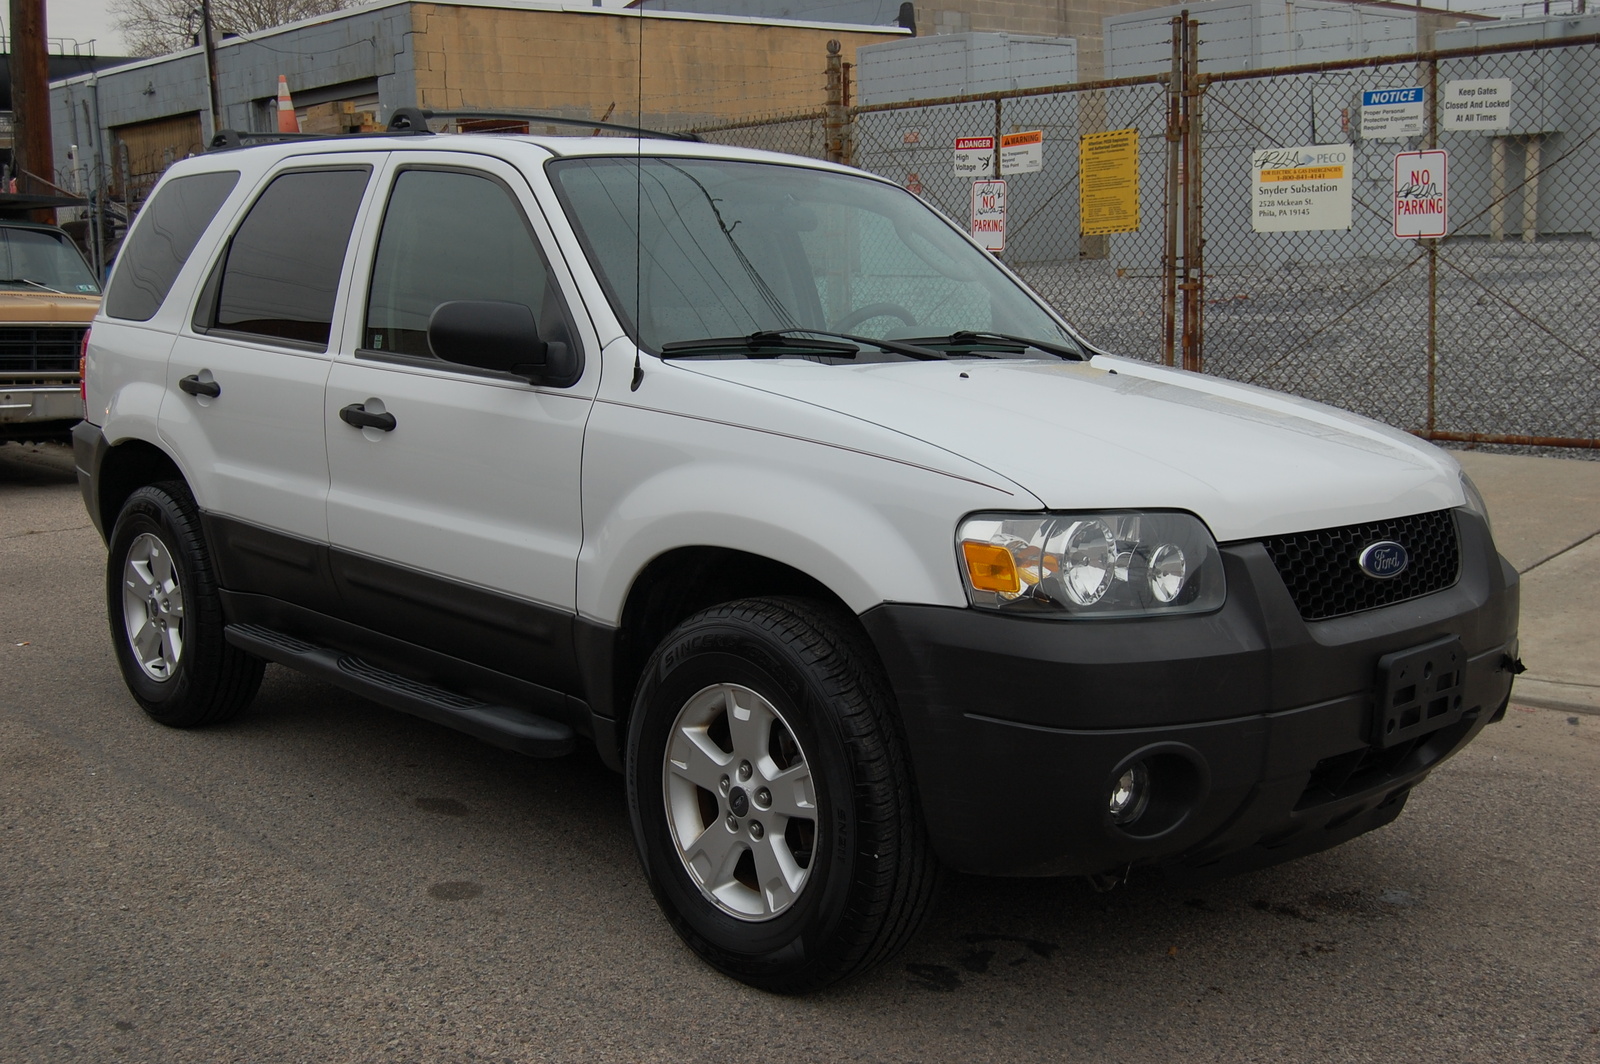 Sold at Auction 2006 Ford Escape Hybrid SUV